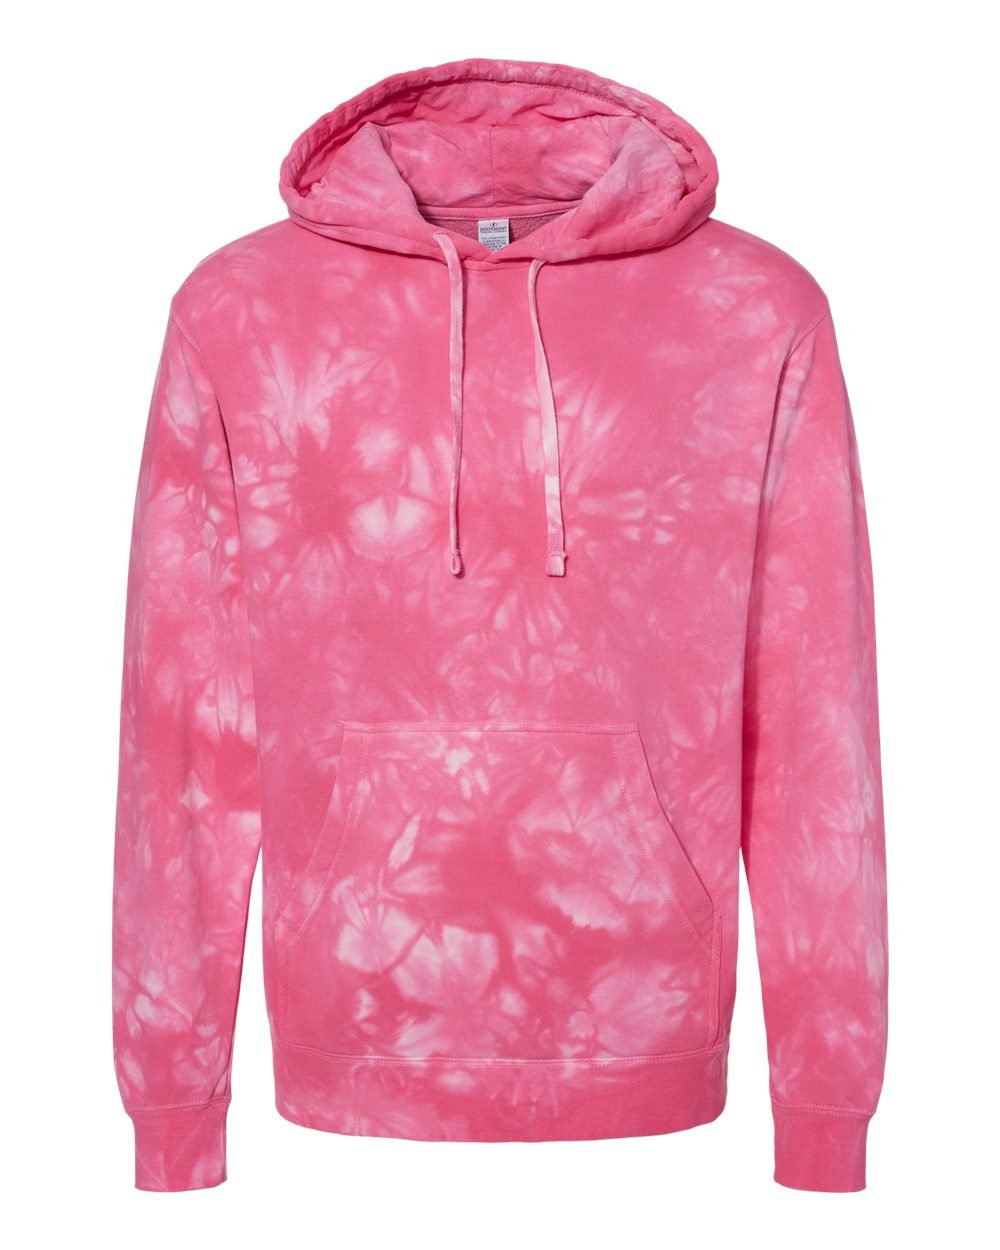 Independent_Trading_Co._PRM4500TD_Tie_Dye_Pink_Front_High.jpg